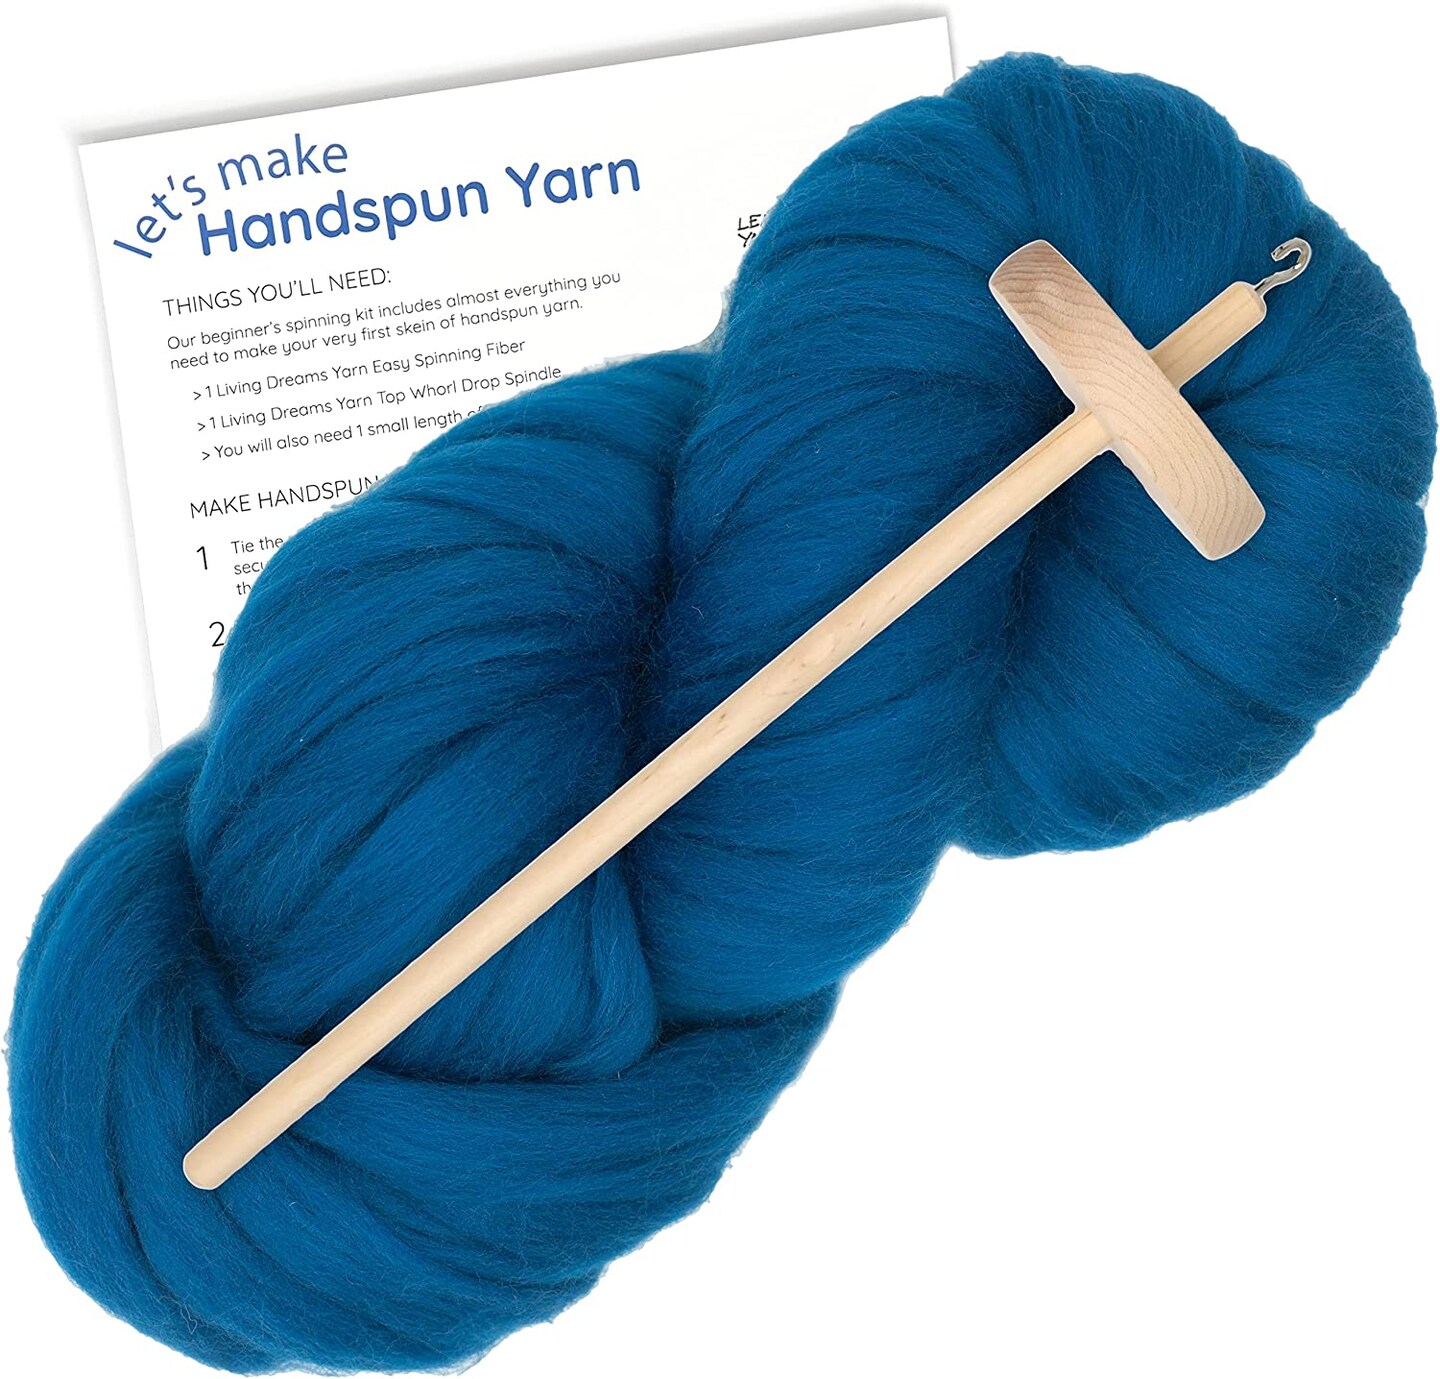 Mixed-Up Monday: Sky Blue  How to dye fabric, Hand dyed yarn, Spinning  yarn fiber